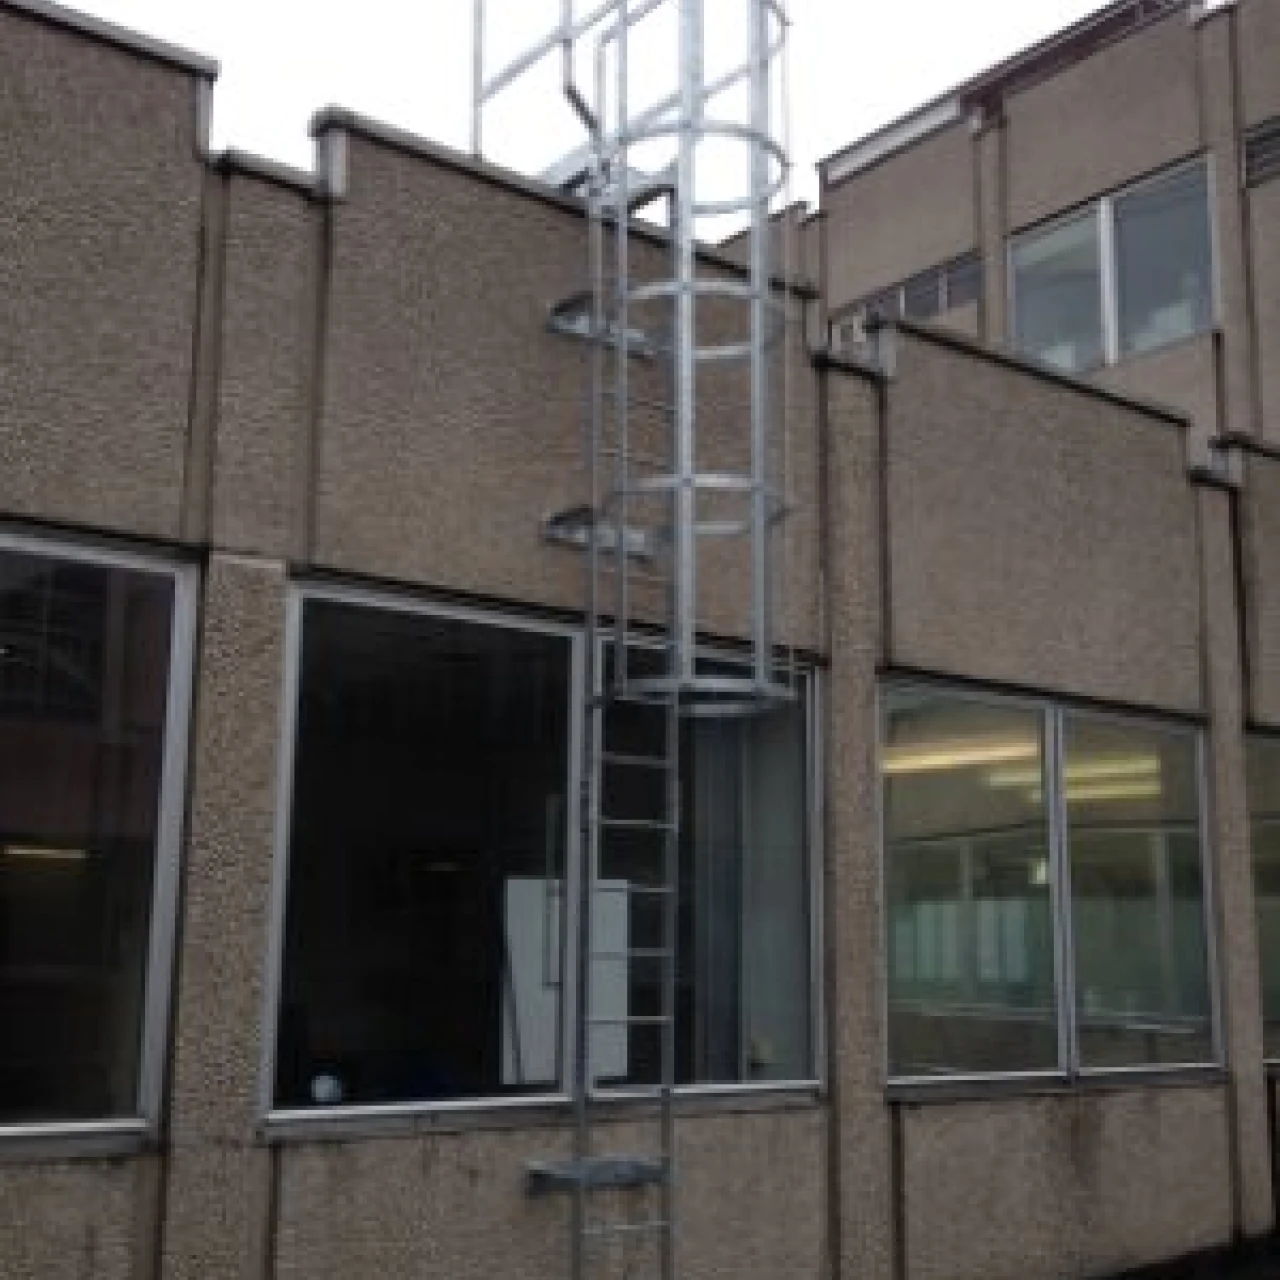 Ladders at Leeds City College